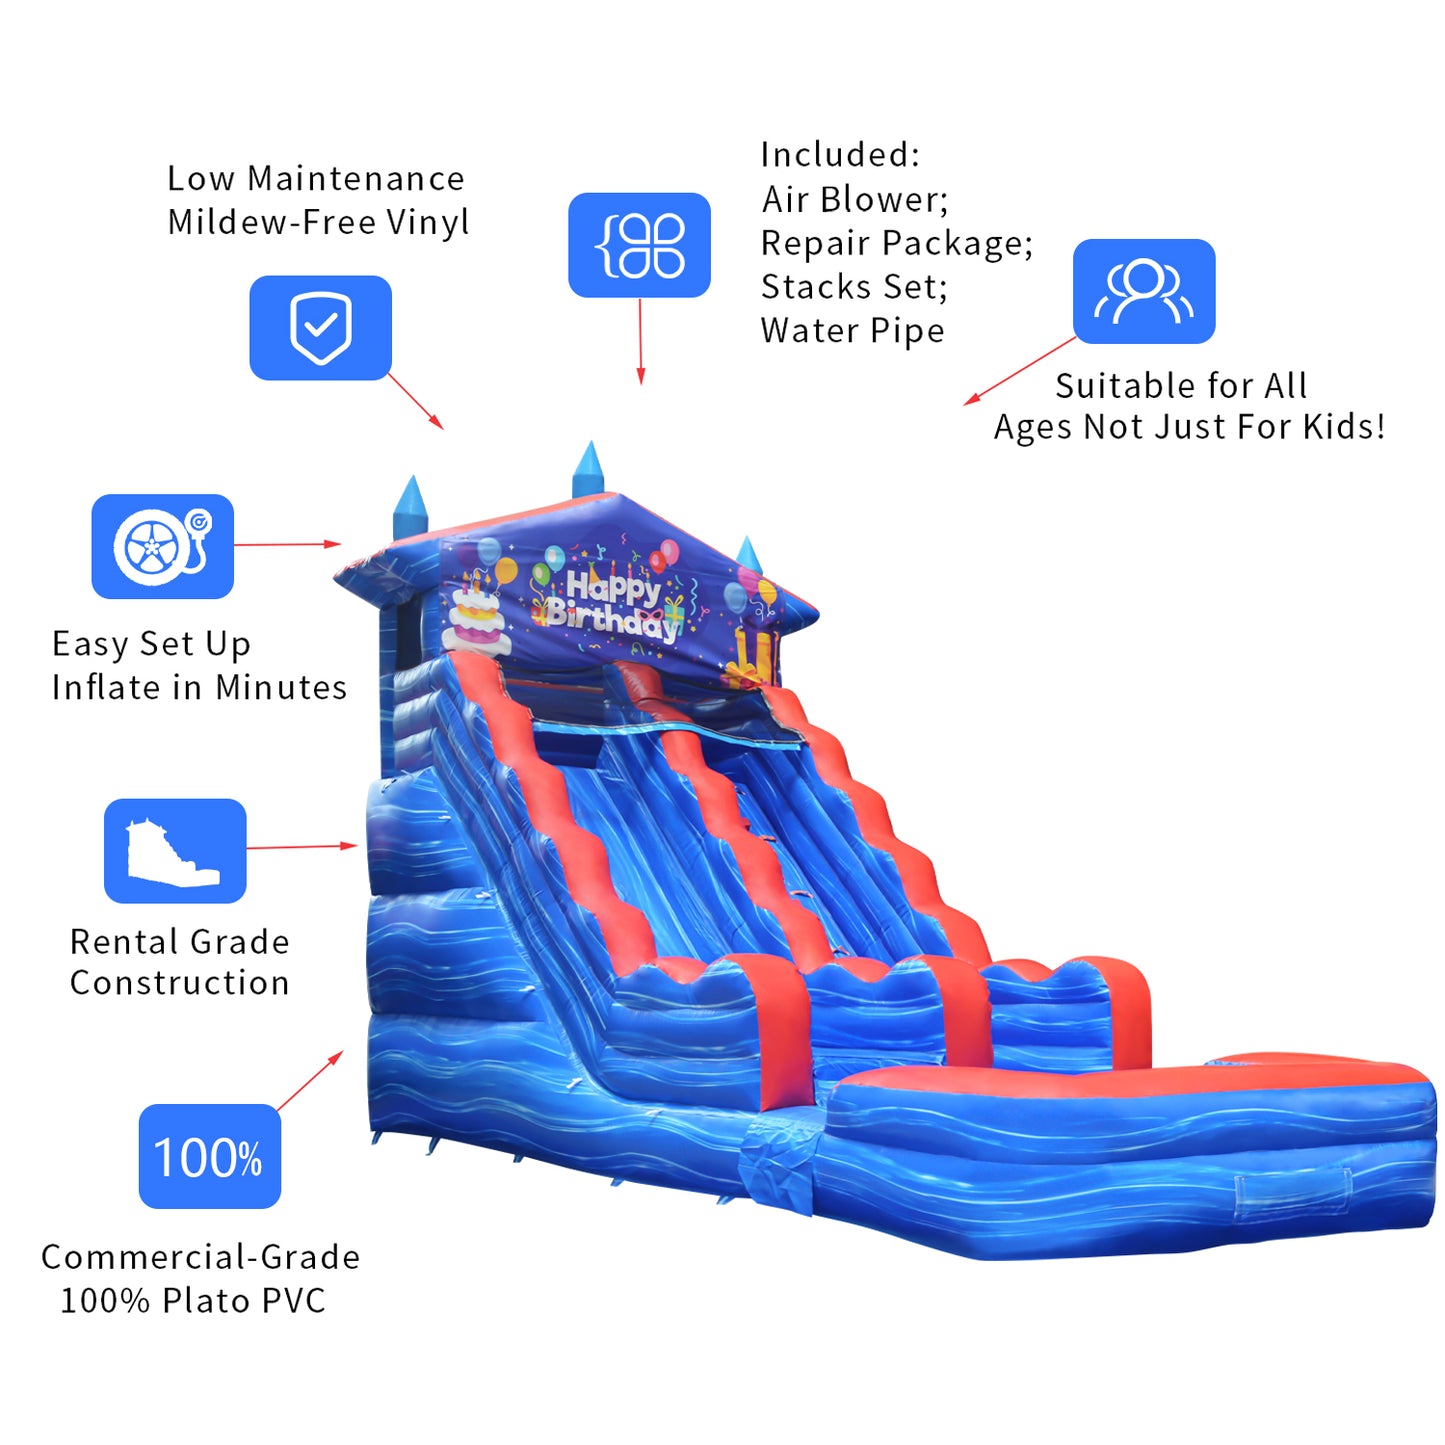 COMING Wet/Dry Happy Birthday Commercial Inflatable Water Slide 26' x 11' x 16' H #11154